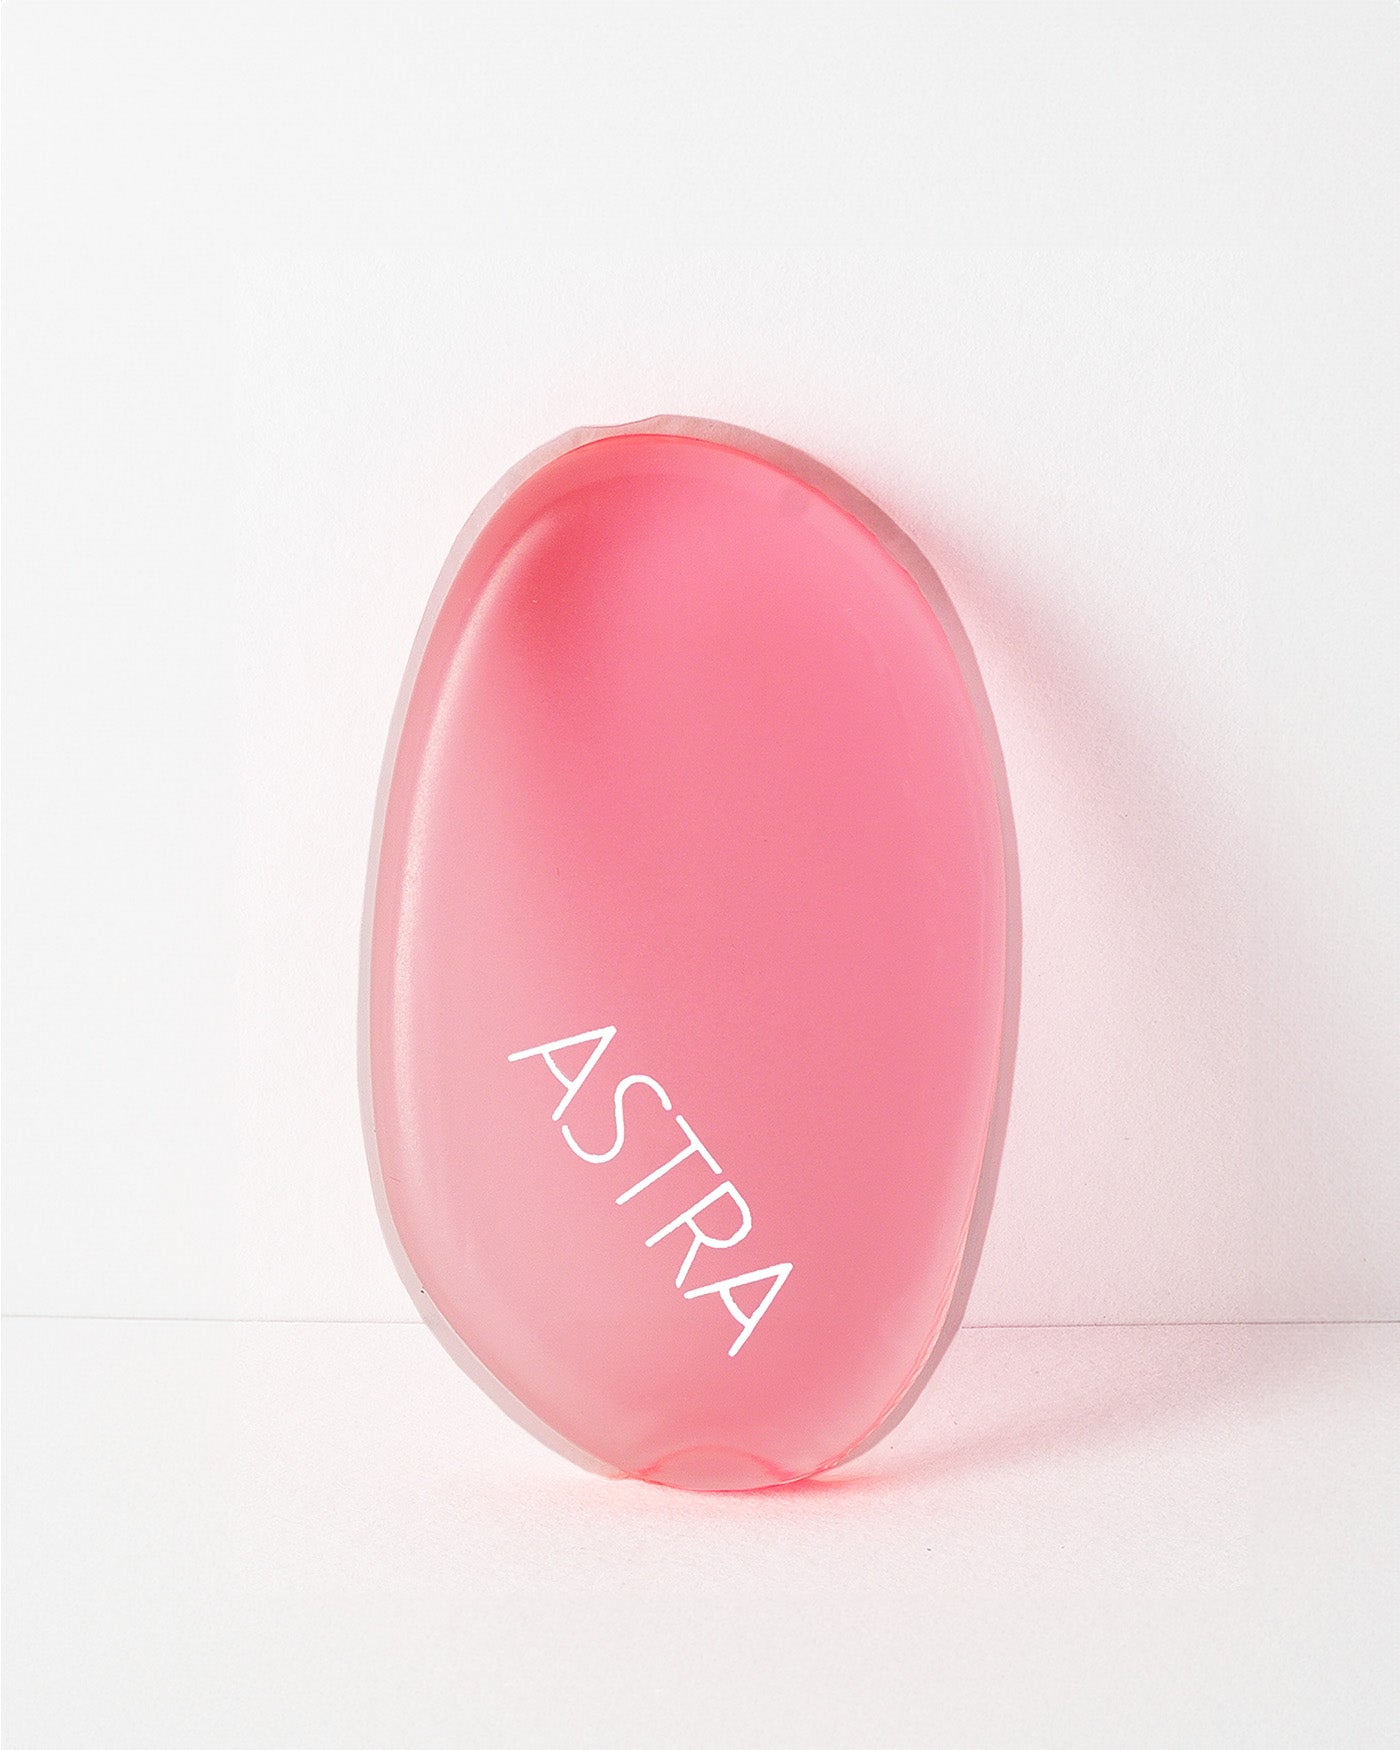 SILICONE SPONGE - All Products - Astra Make-Up